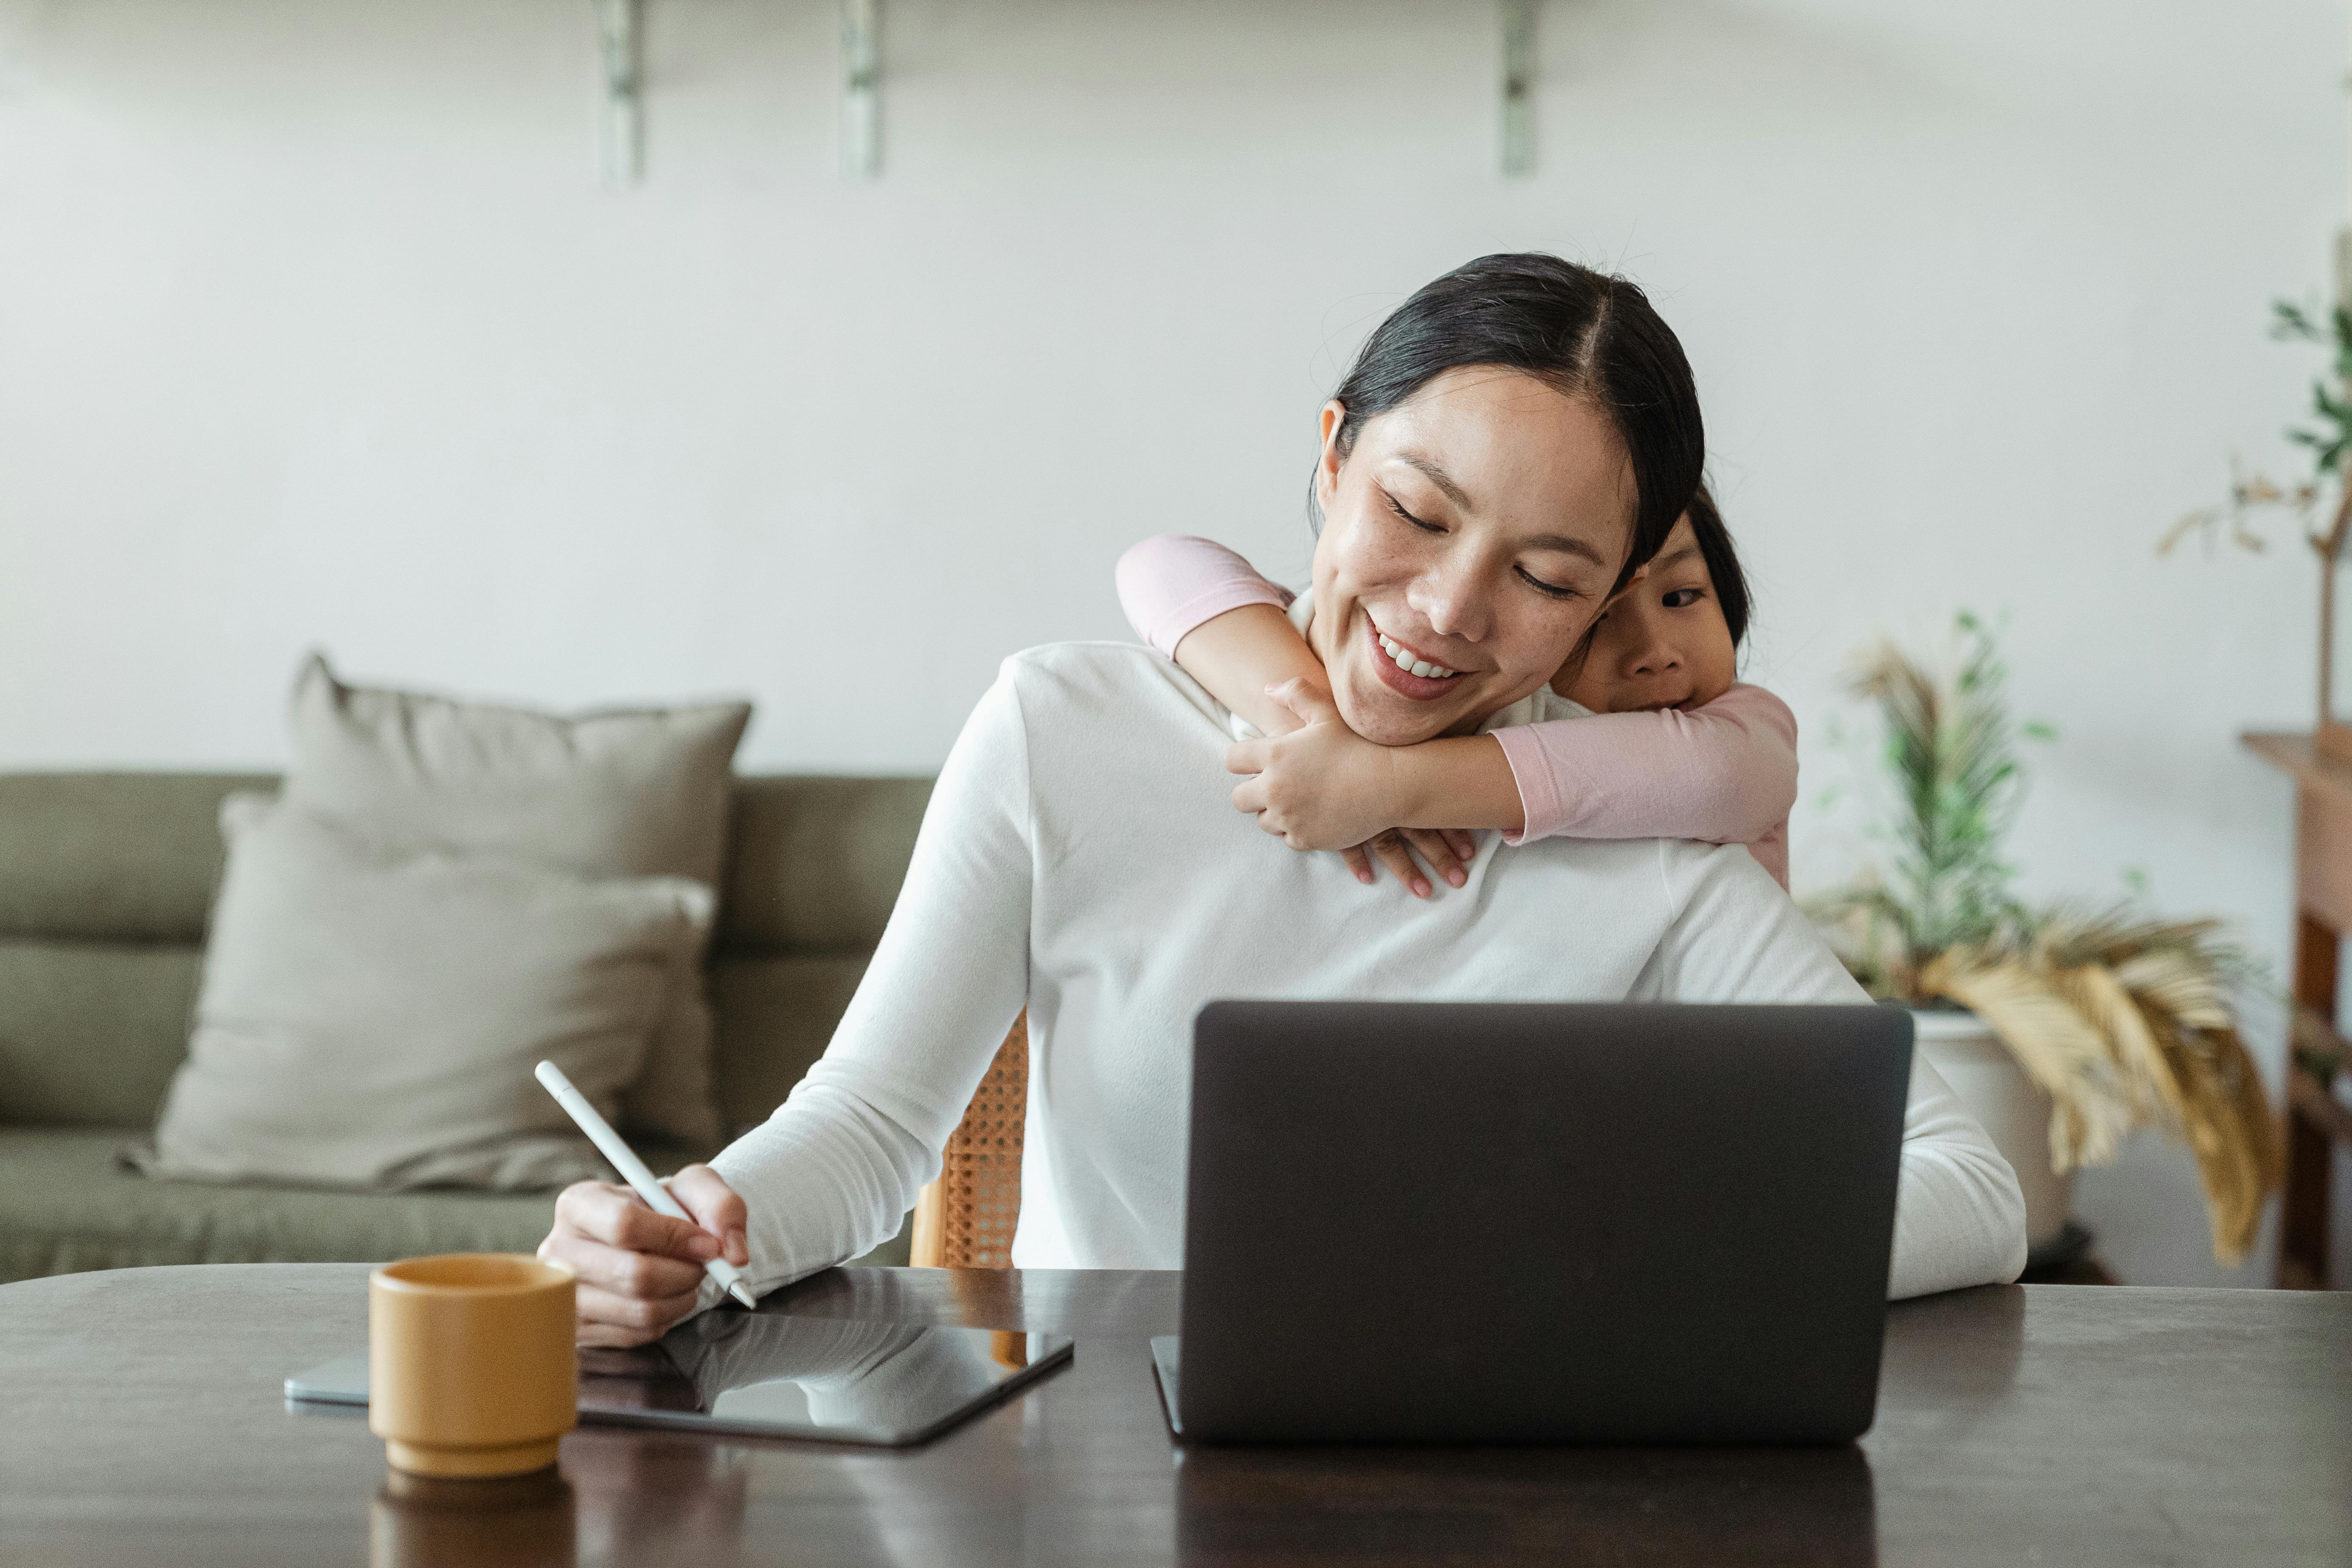 A stay-at-home mom and her daughter | Source: Pexels